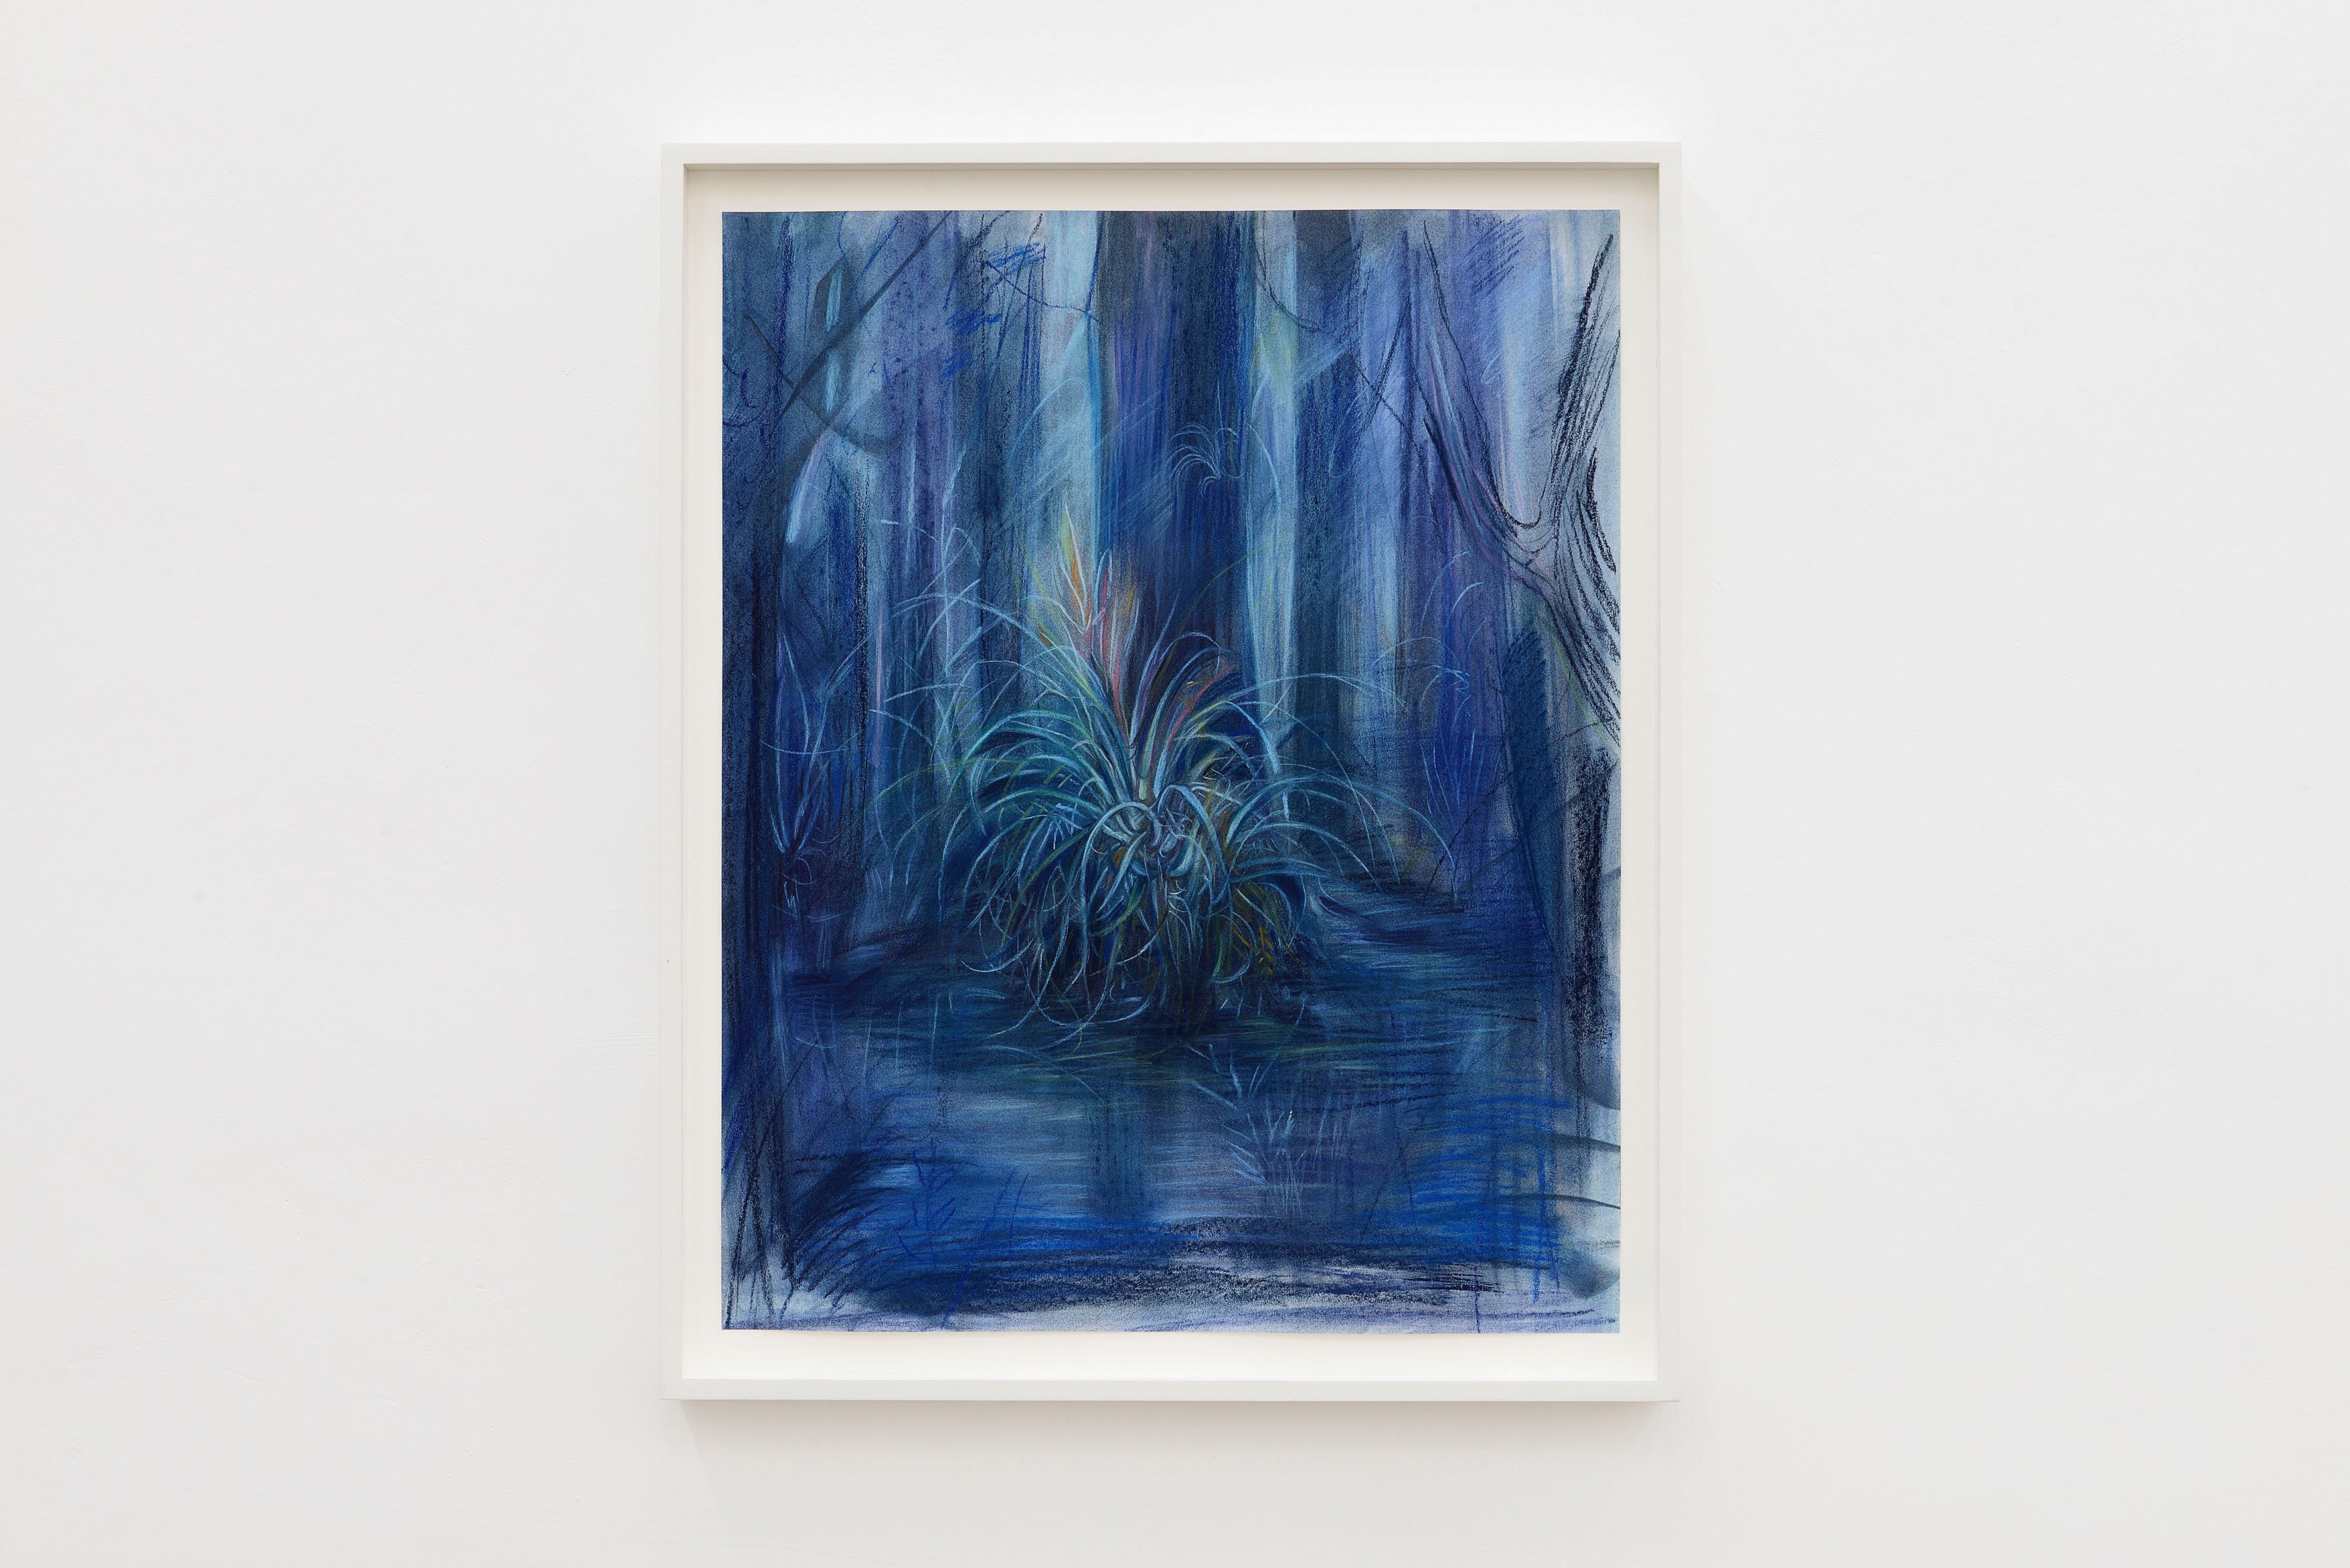 Alina Perez, Bromeliad, 2024, charcoal and pastel on paper, framed, 75 x 61 x 5 cm